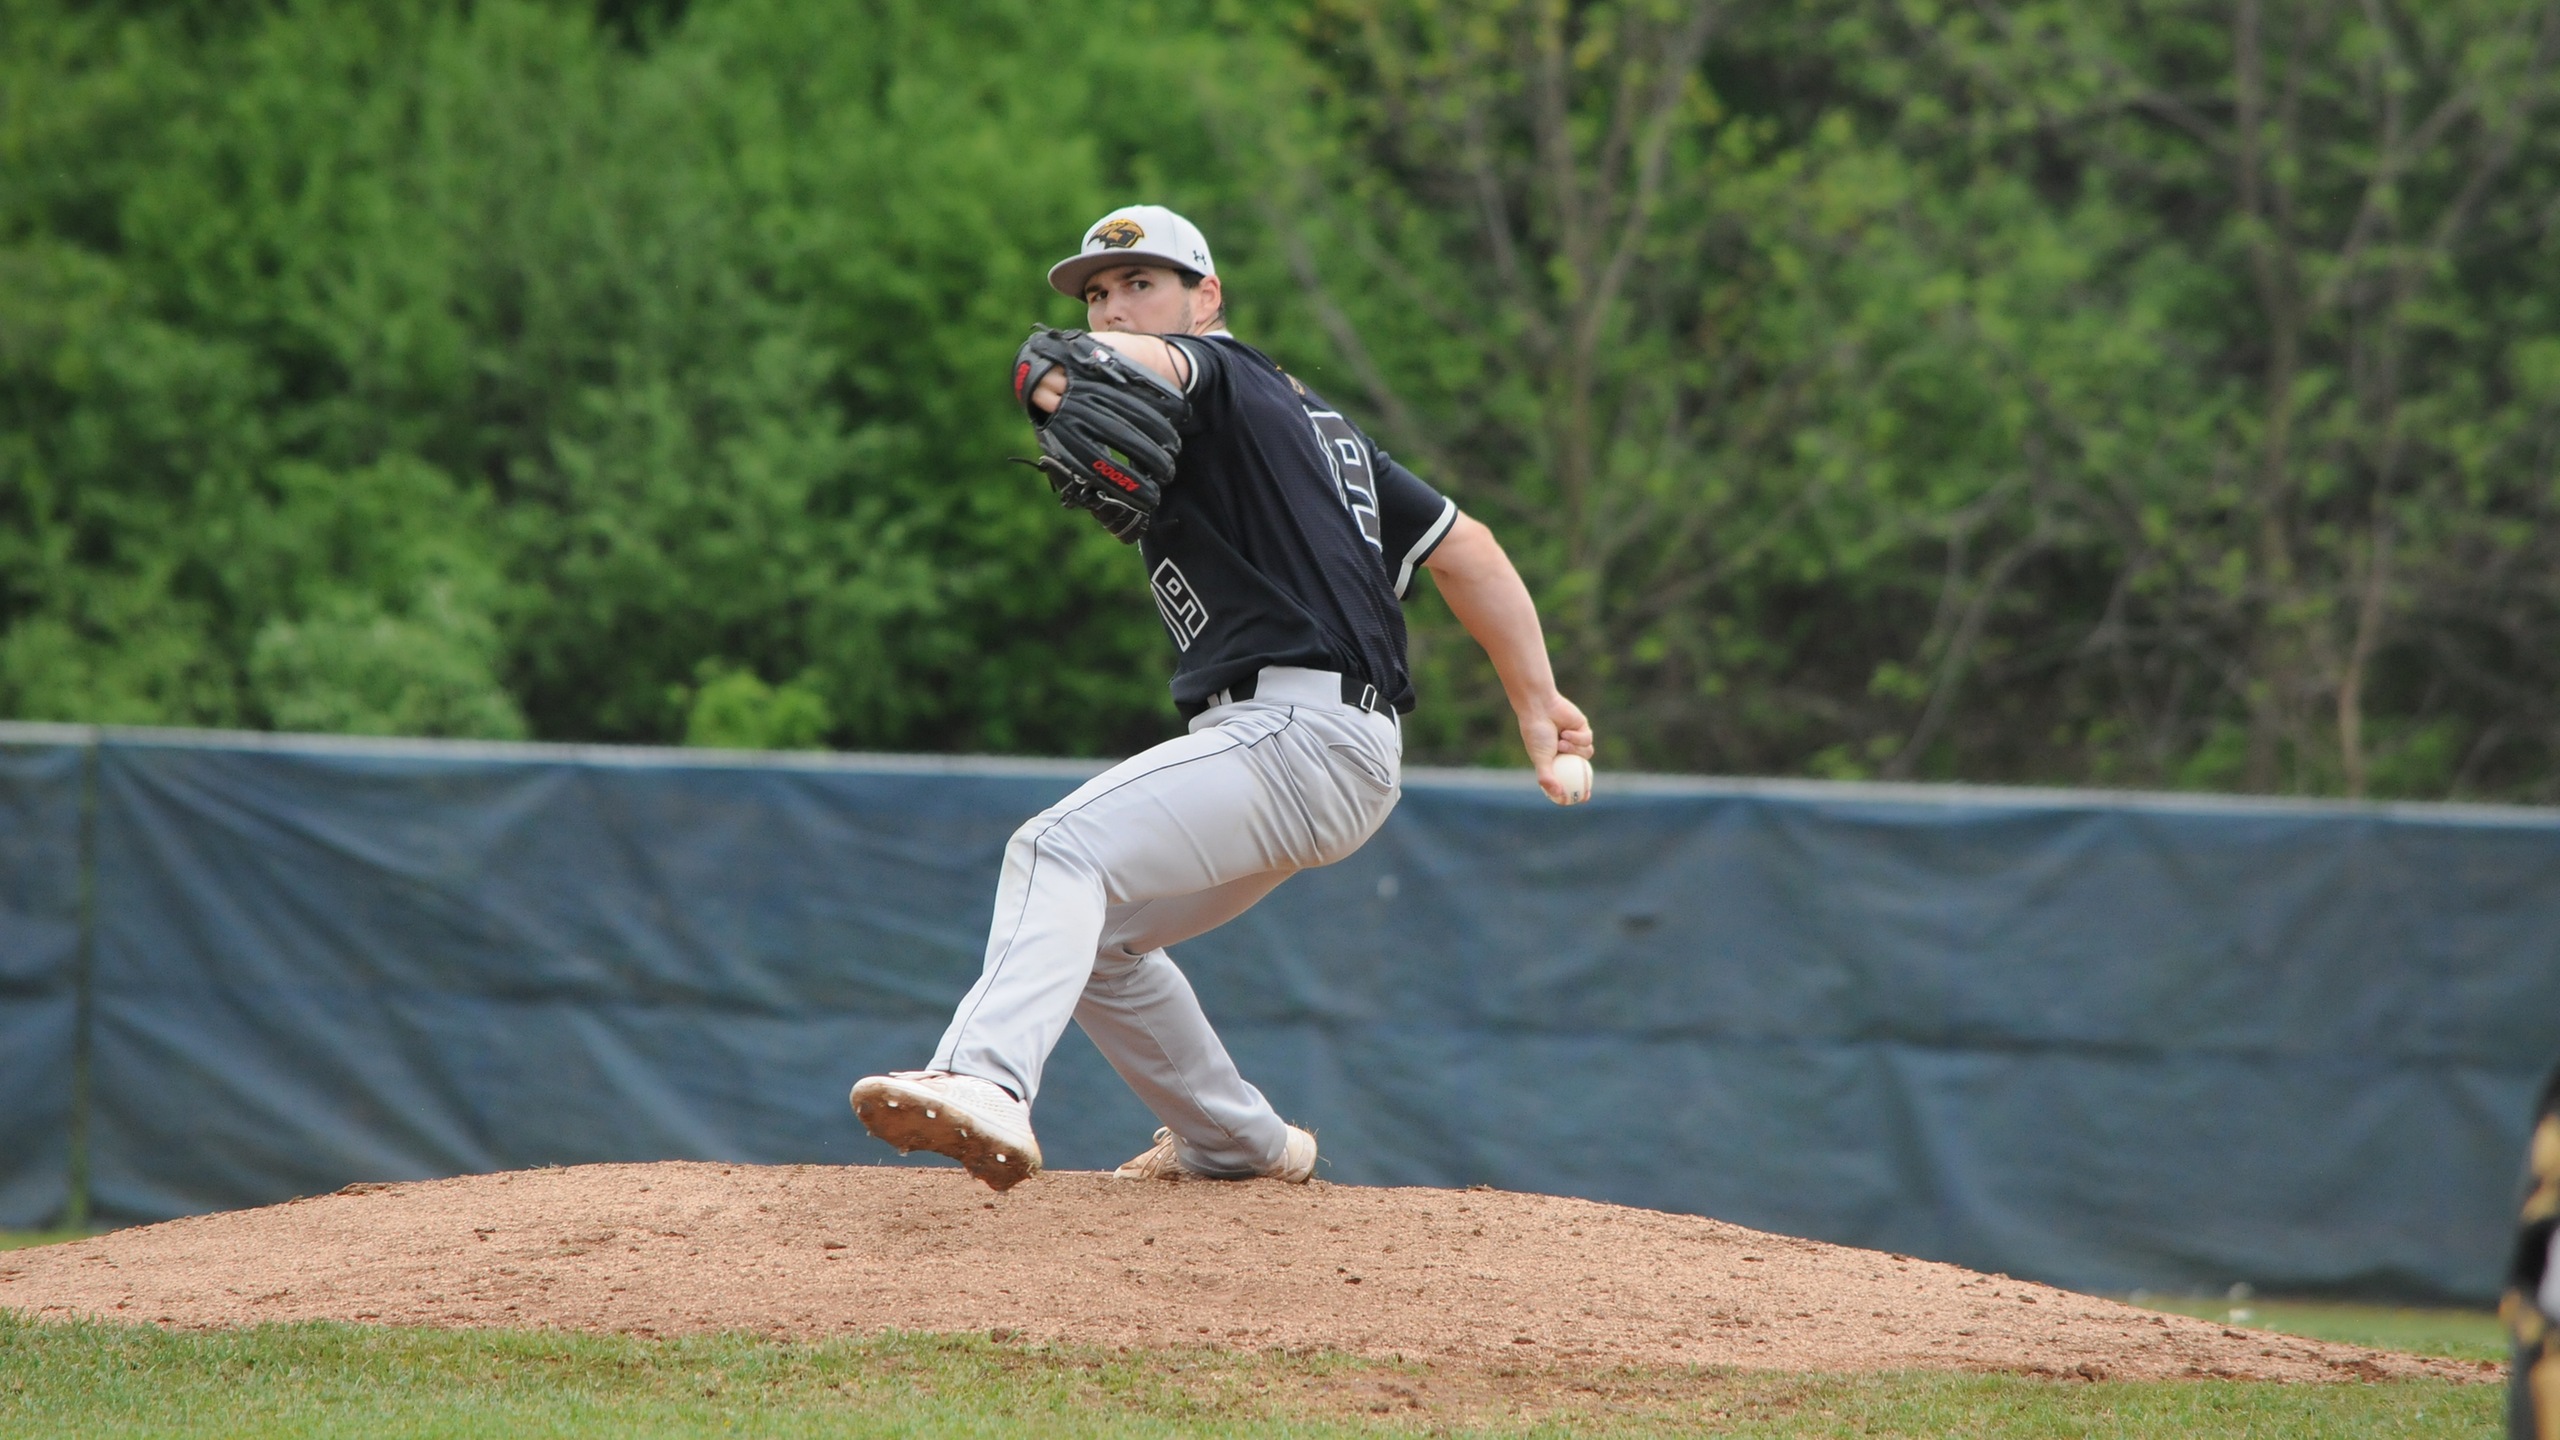 Jarrett Scheelk, who recorded a pair of hits at the plate, pitched a complete game for the Titans with just three hits and one earned run allowed.